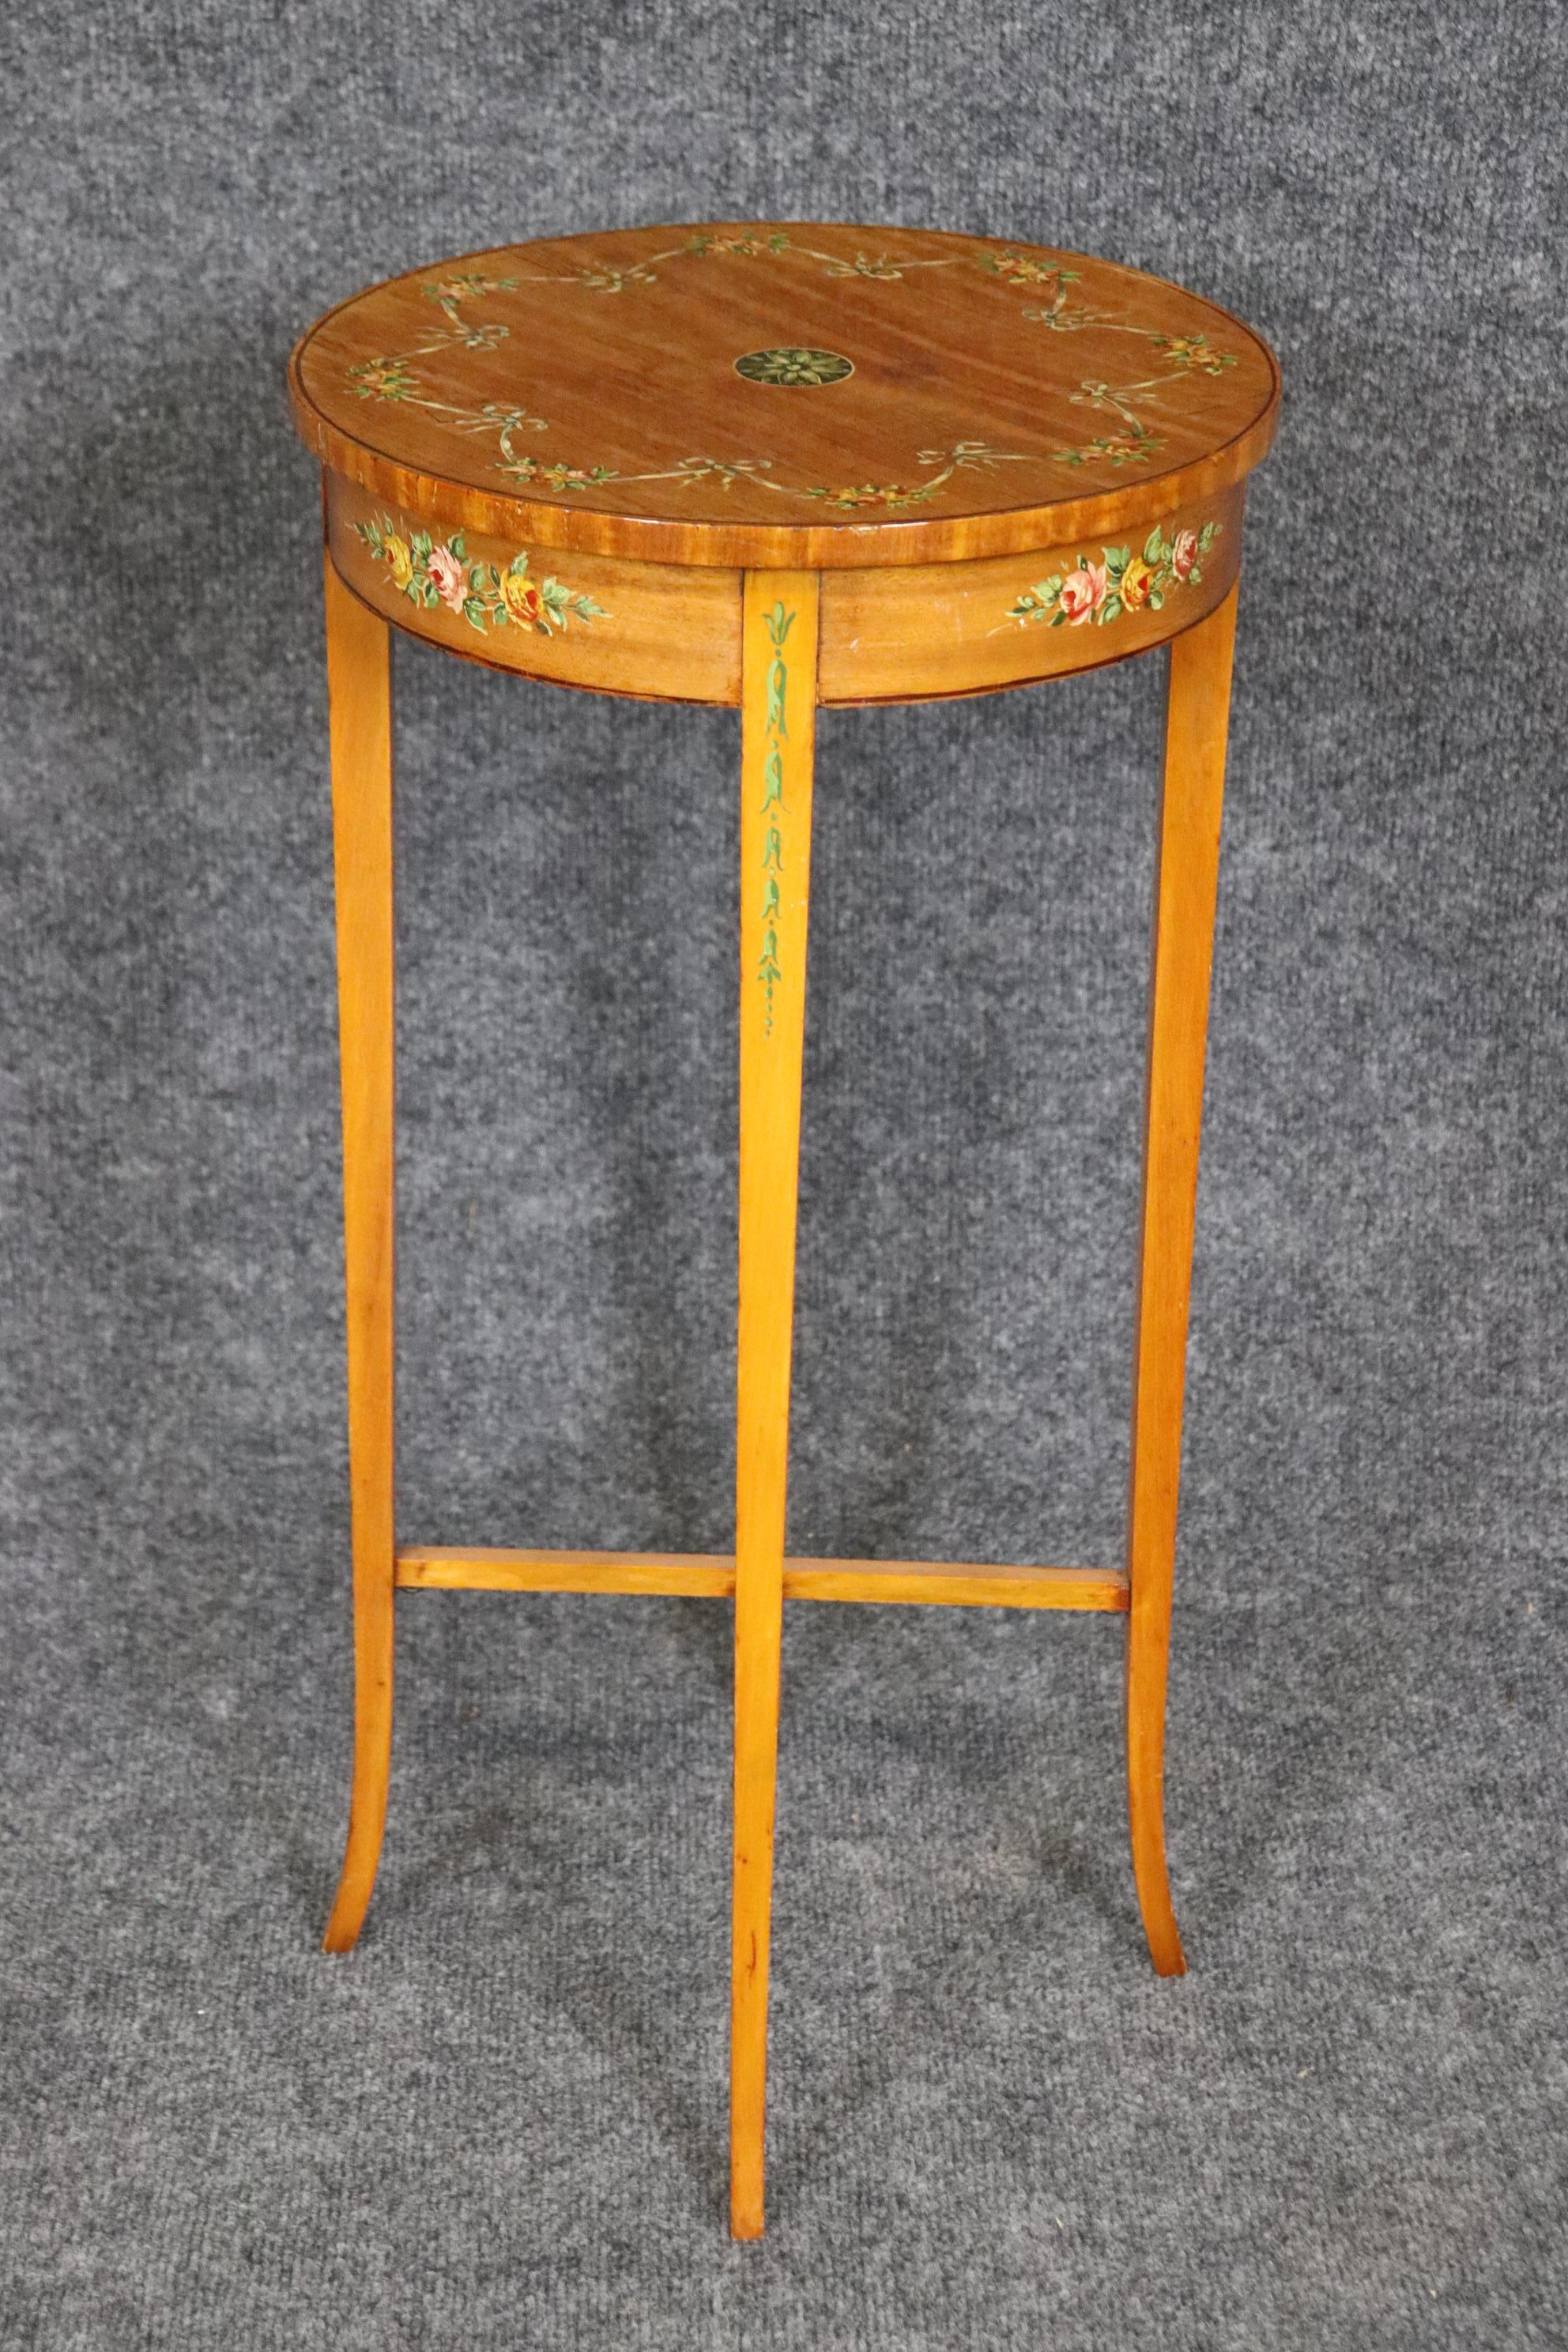 Dimensions: Height: 24 1/4 in Diameter: 12 in 

This English 19th century Adams paint decorated accent table end table by Gillow & Co is made of the highest quality! If you look at the photos provided, you can see the detail in the beautiful paint